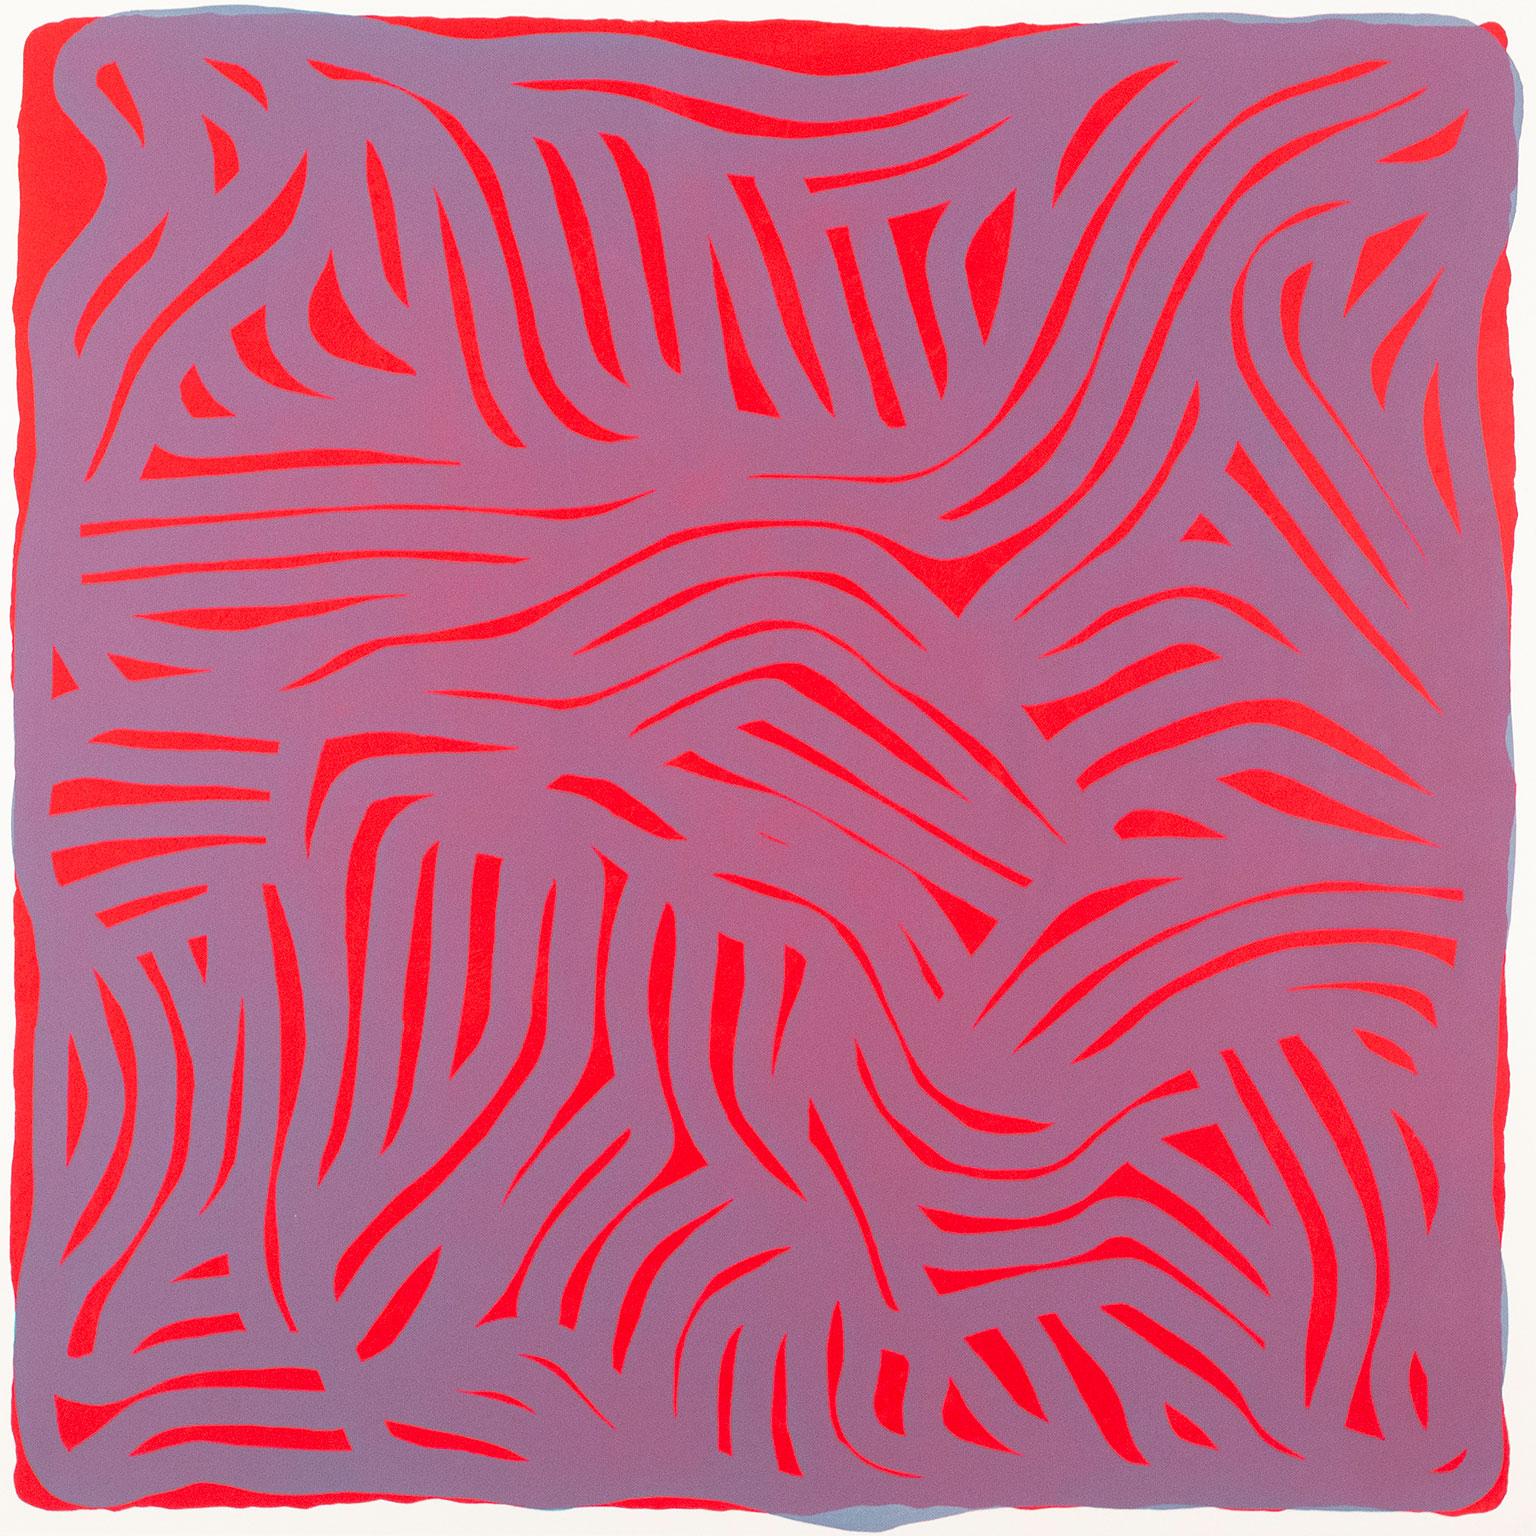 Parallel Curves - Abstract Geometric Print by Sol LeWitt